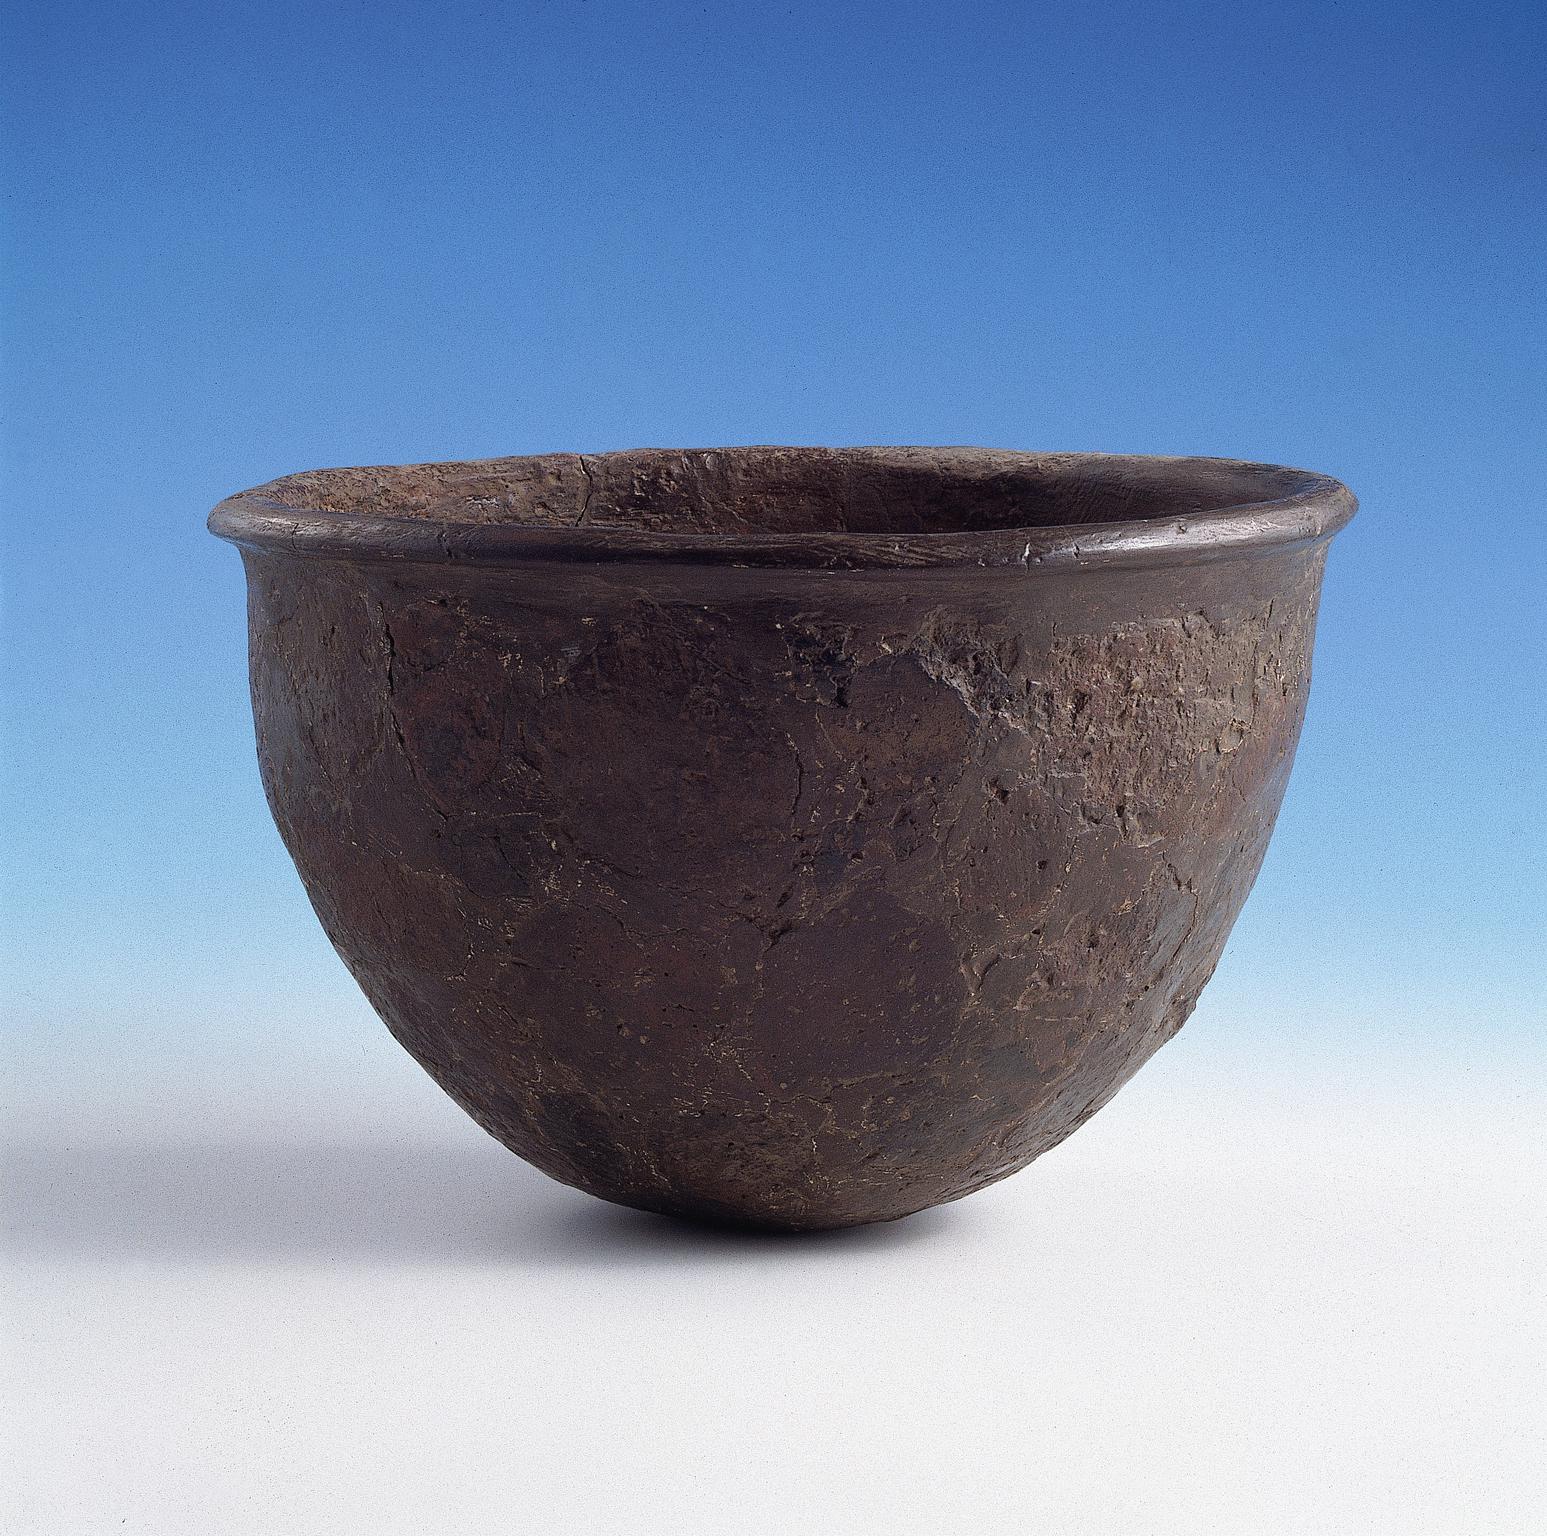 Neolithic pottery bowl